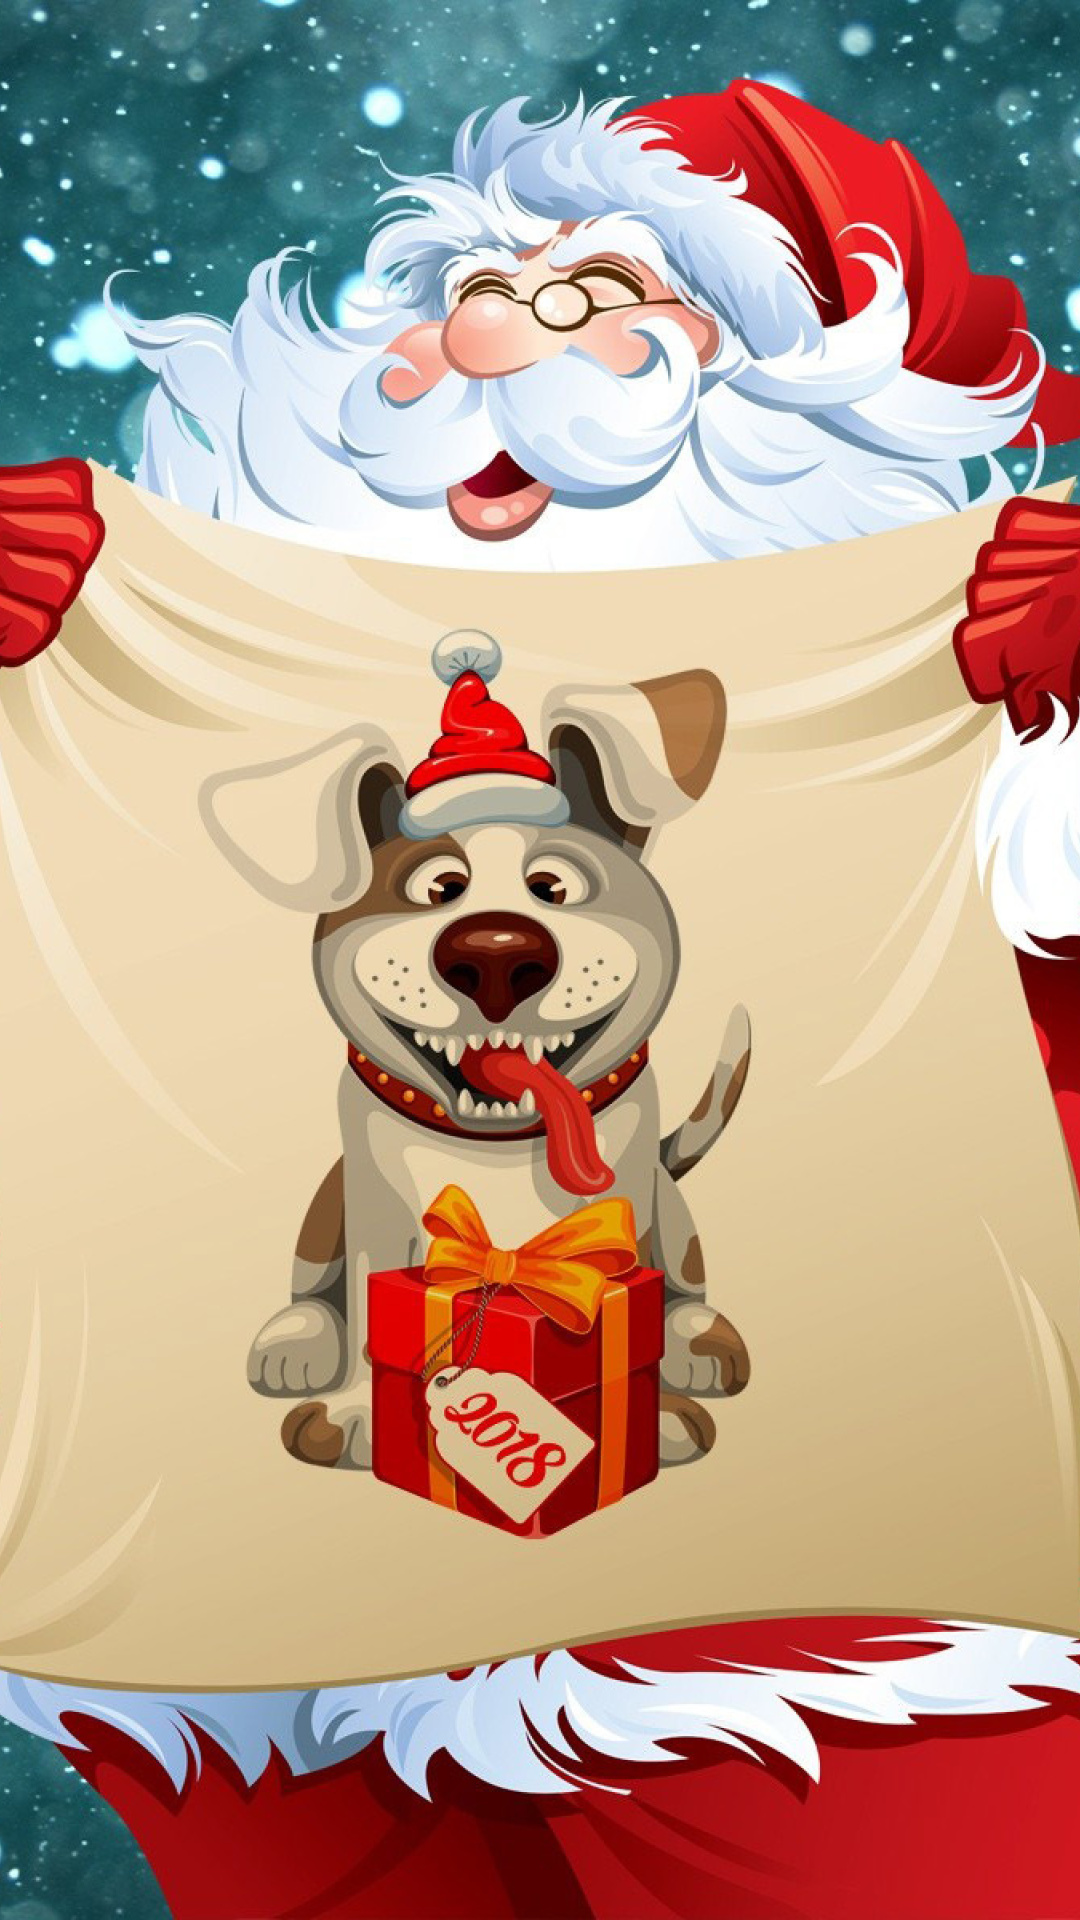 Happy New Year 2018 with Dog and Santa wallpaper 1080x1920